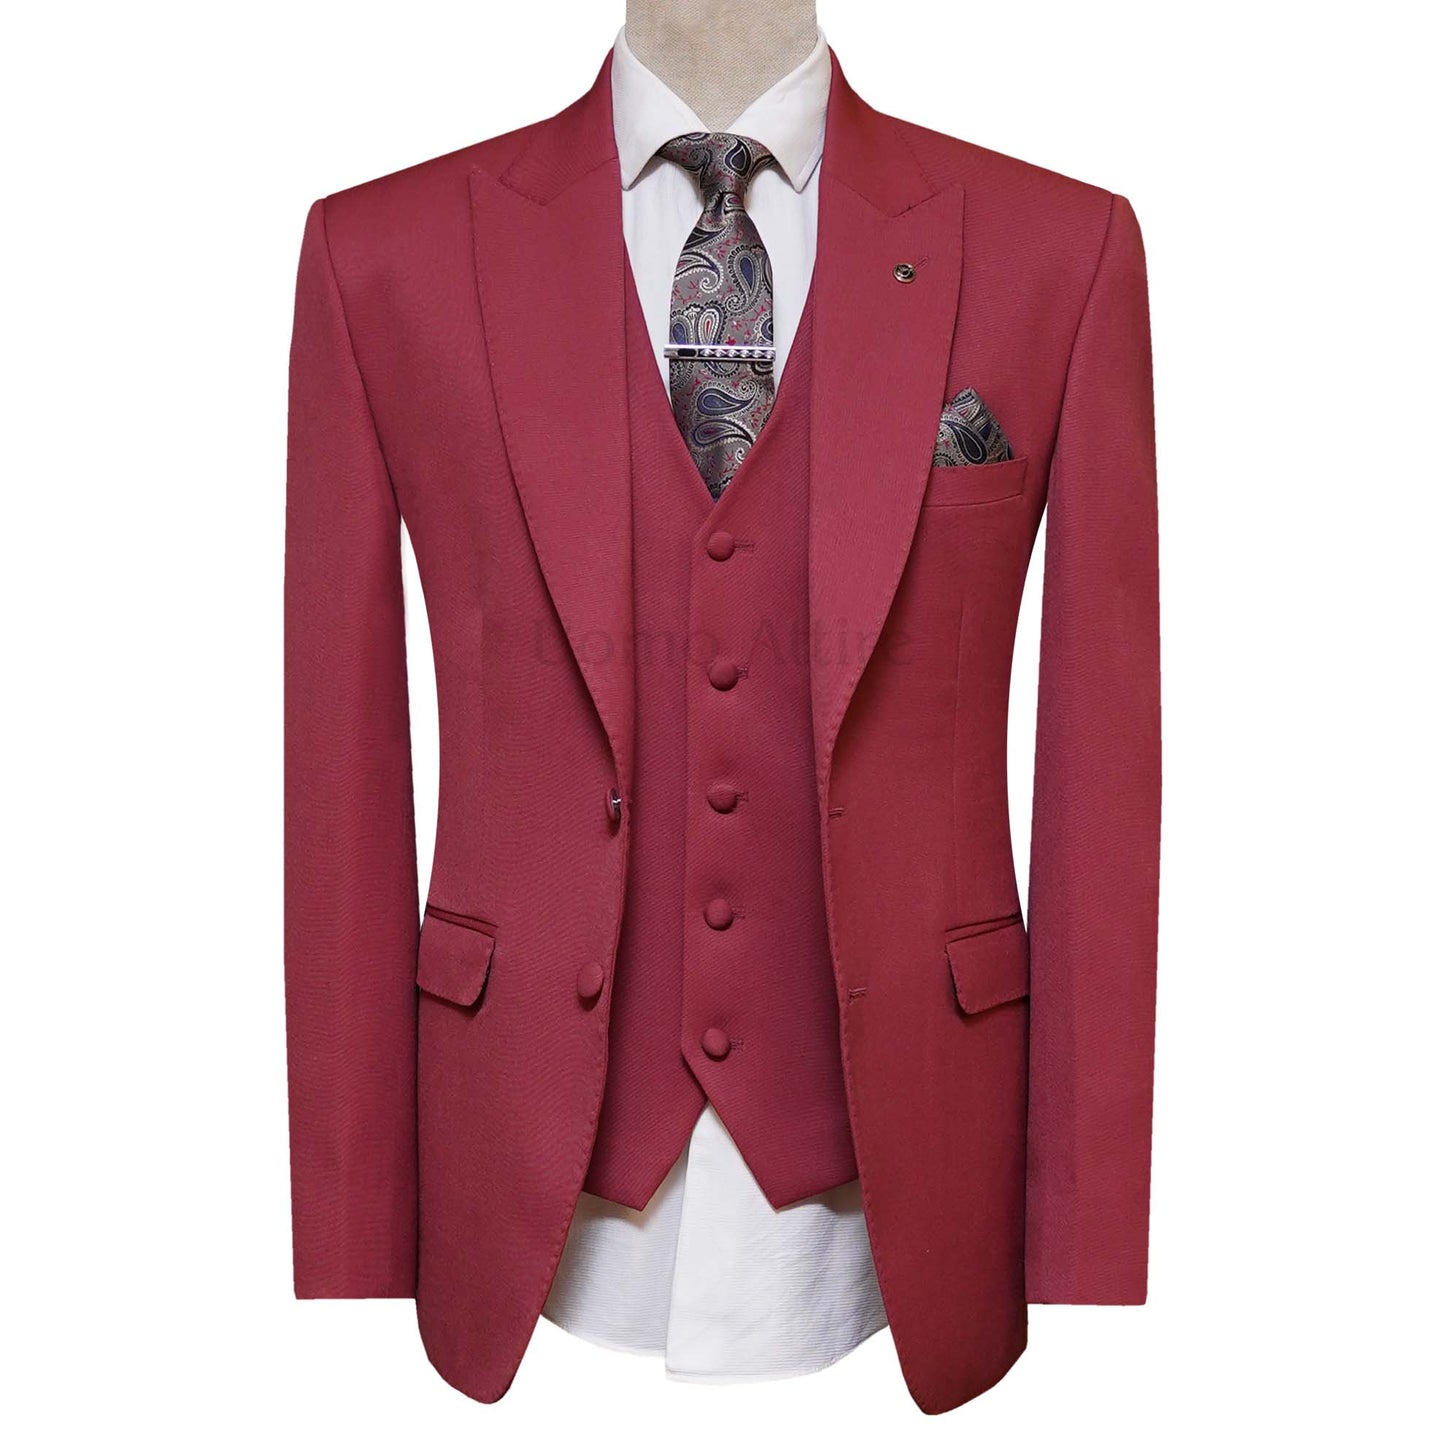 3 Piece Suit Collection  Quality 3-Piece Suits for Any Occasion – Uomo  Attire